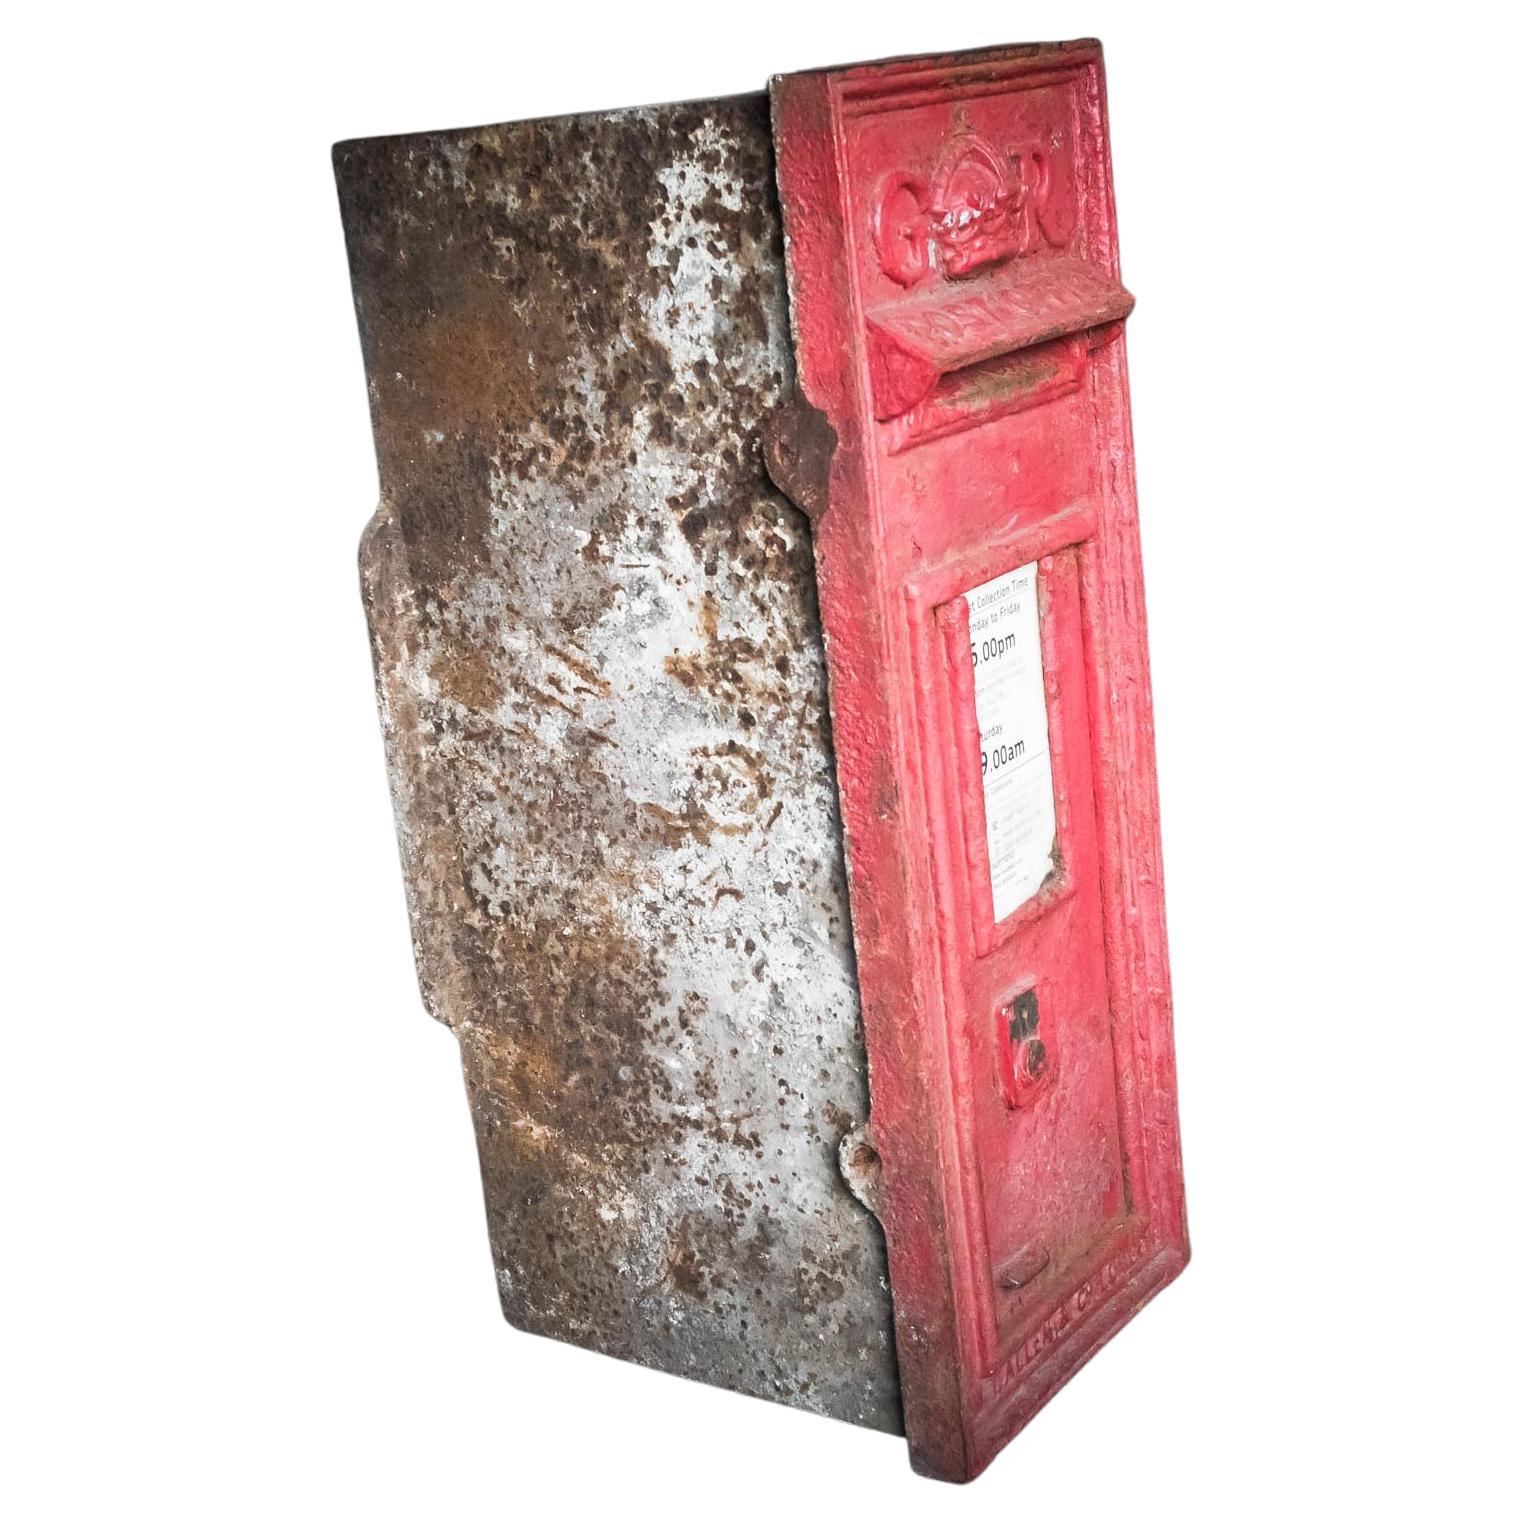 GR Royal Mail Post Box For Sale